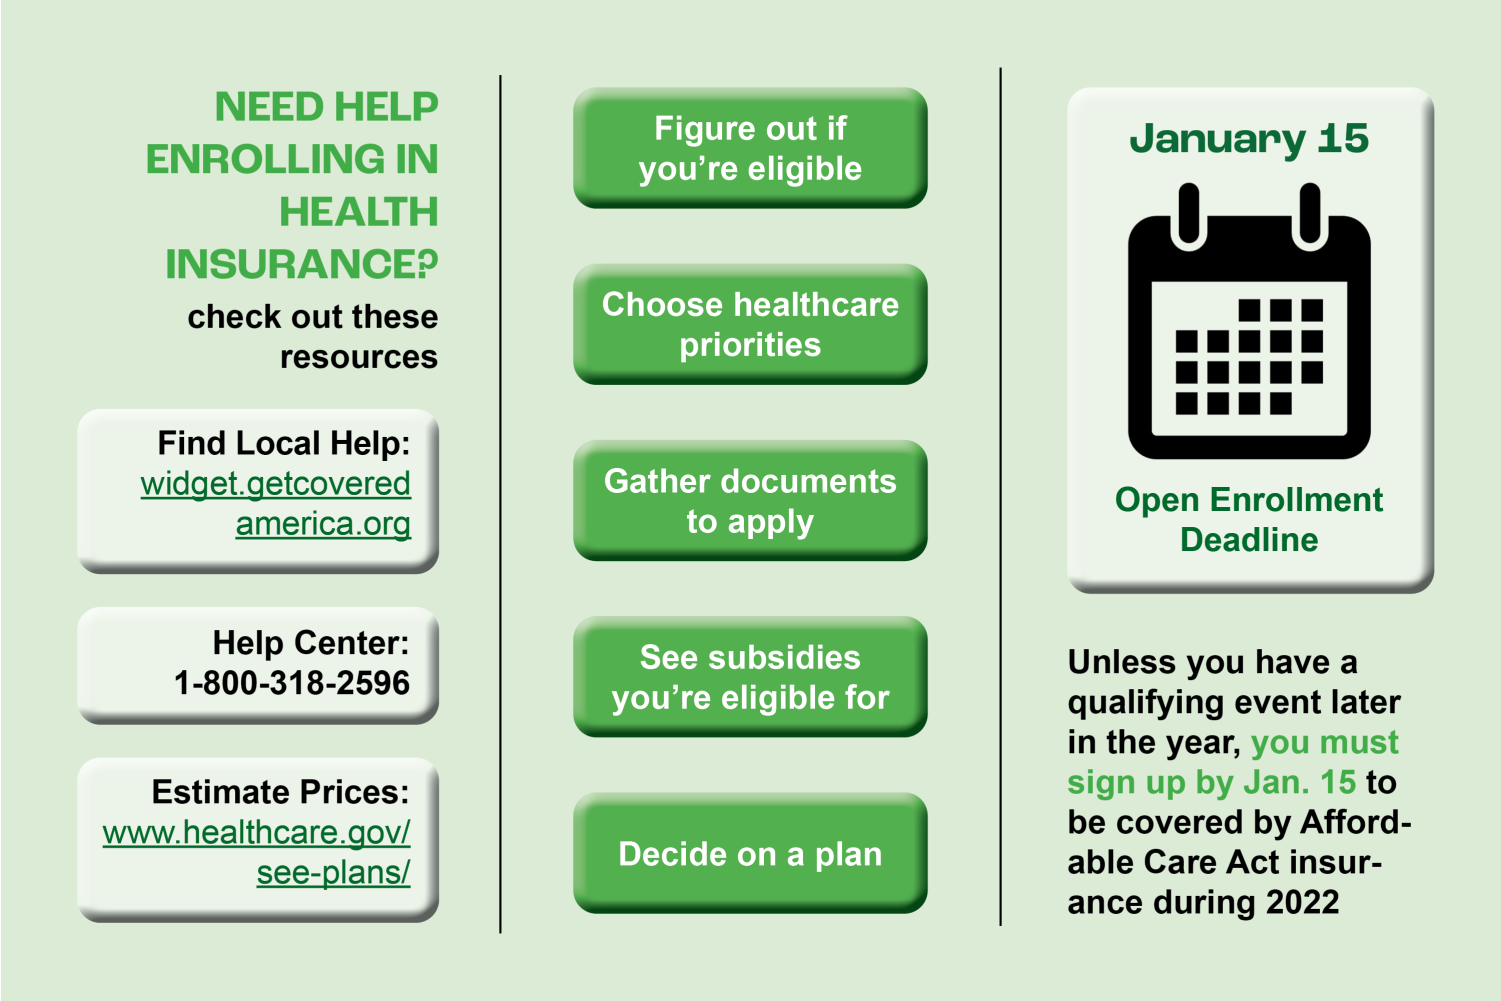 A+green+infographic+about+enrolling+in+health+insurance.+It+highlights+three+resources%3A+widget.getcoveredamerica.org+for+finding+local+help%2C+the+helpline+1-800-318-2596+and+www.healthcare.gov%2Fsee-plans%2F+for+estimating+prices.+A+drawing+of+a+calendar+sits+above+text+which+reads%2C+%E2%80%9CUnless+you+have+a+qualifying+event+later+in+the+year%2C+you+must+sign+up+by+Jan.+15+to+be+covered+by+Affordable+Care+Act+insurance+during+2022.%E2%80%9D+In+the+center%2C+the+infographic+notes+5+steps+for+signing+up+for+insurance+under+ACA%3A+figure+out+if+you%E2%80%99re+eligible%2C+choose+your+healthcare+priorities%2C+gather+documents+to+apply%2C+see+subsidies+you%E2%80%99re+eligible+for+and+decide+on+a+plan.